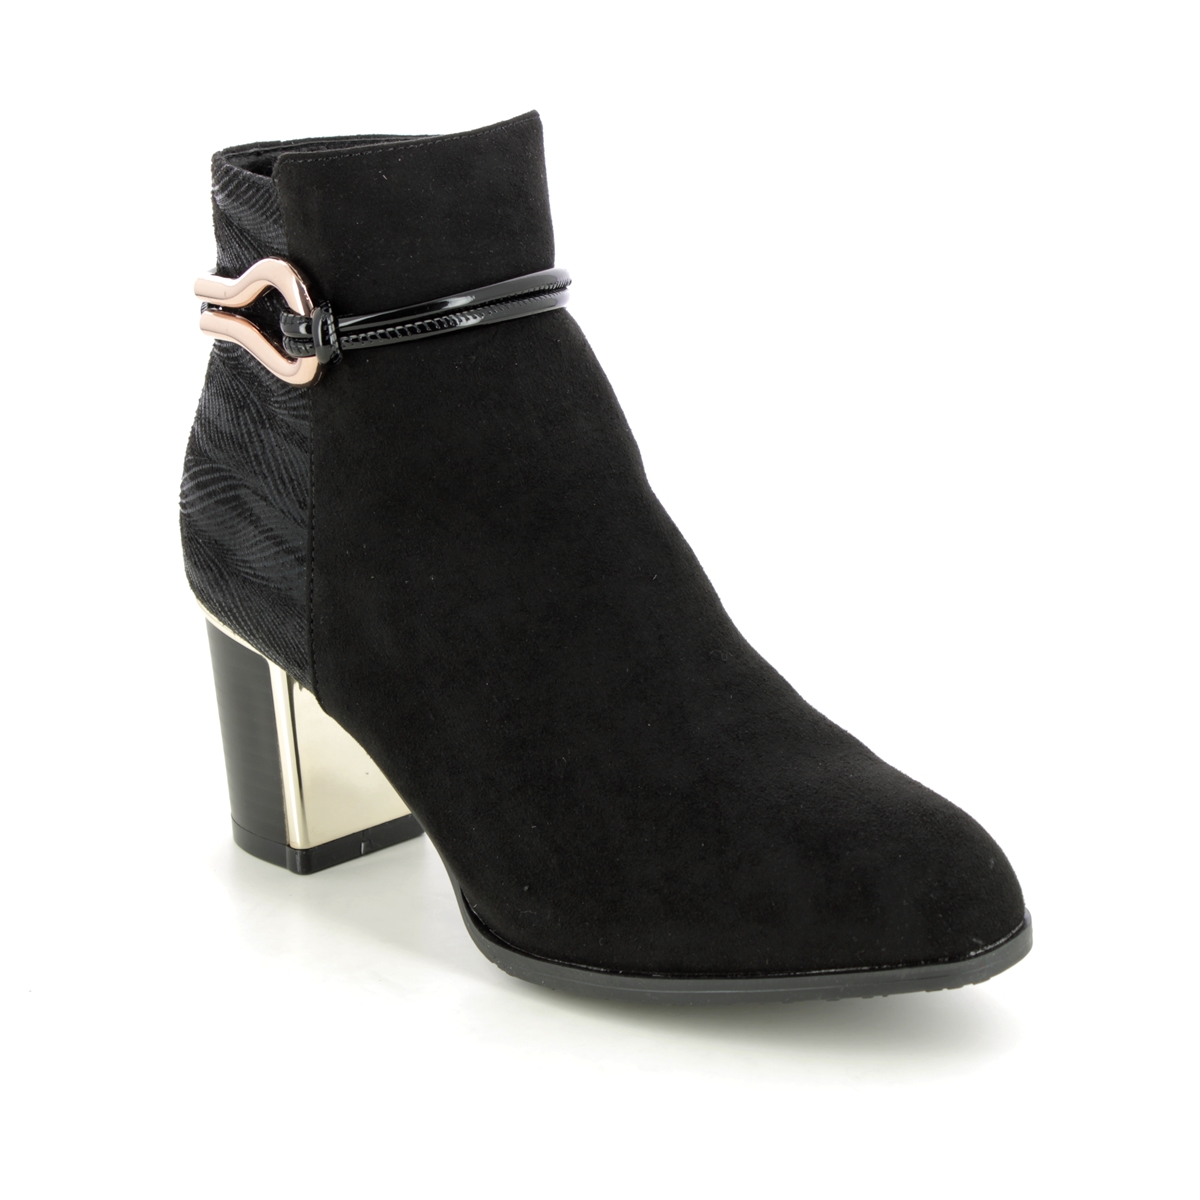 Lotus Autumn Greeve Black Womens Heeled Boots in a Plain  in Size 5